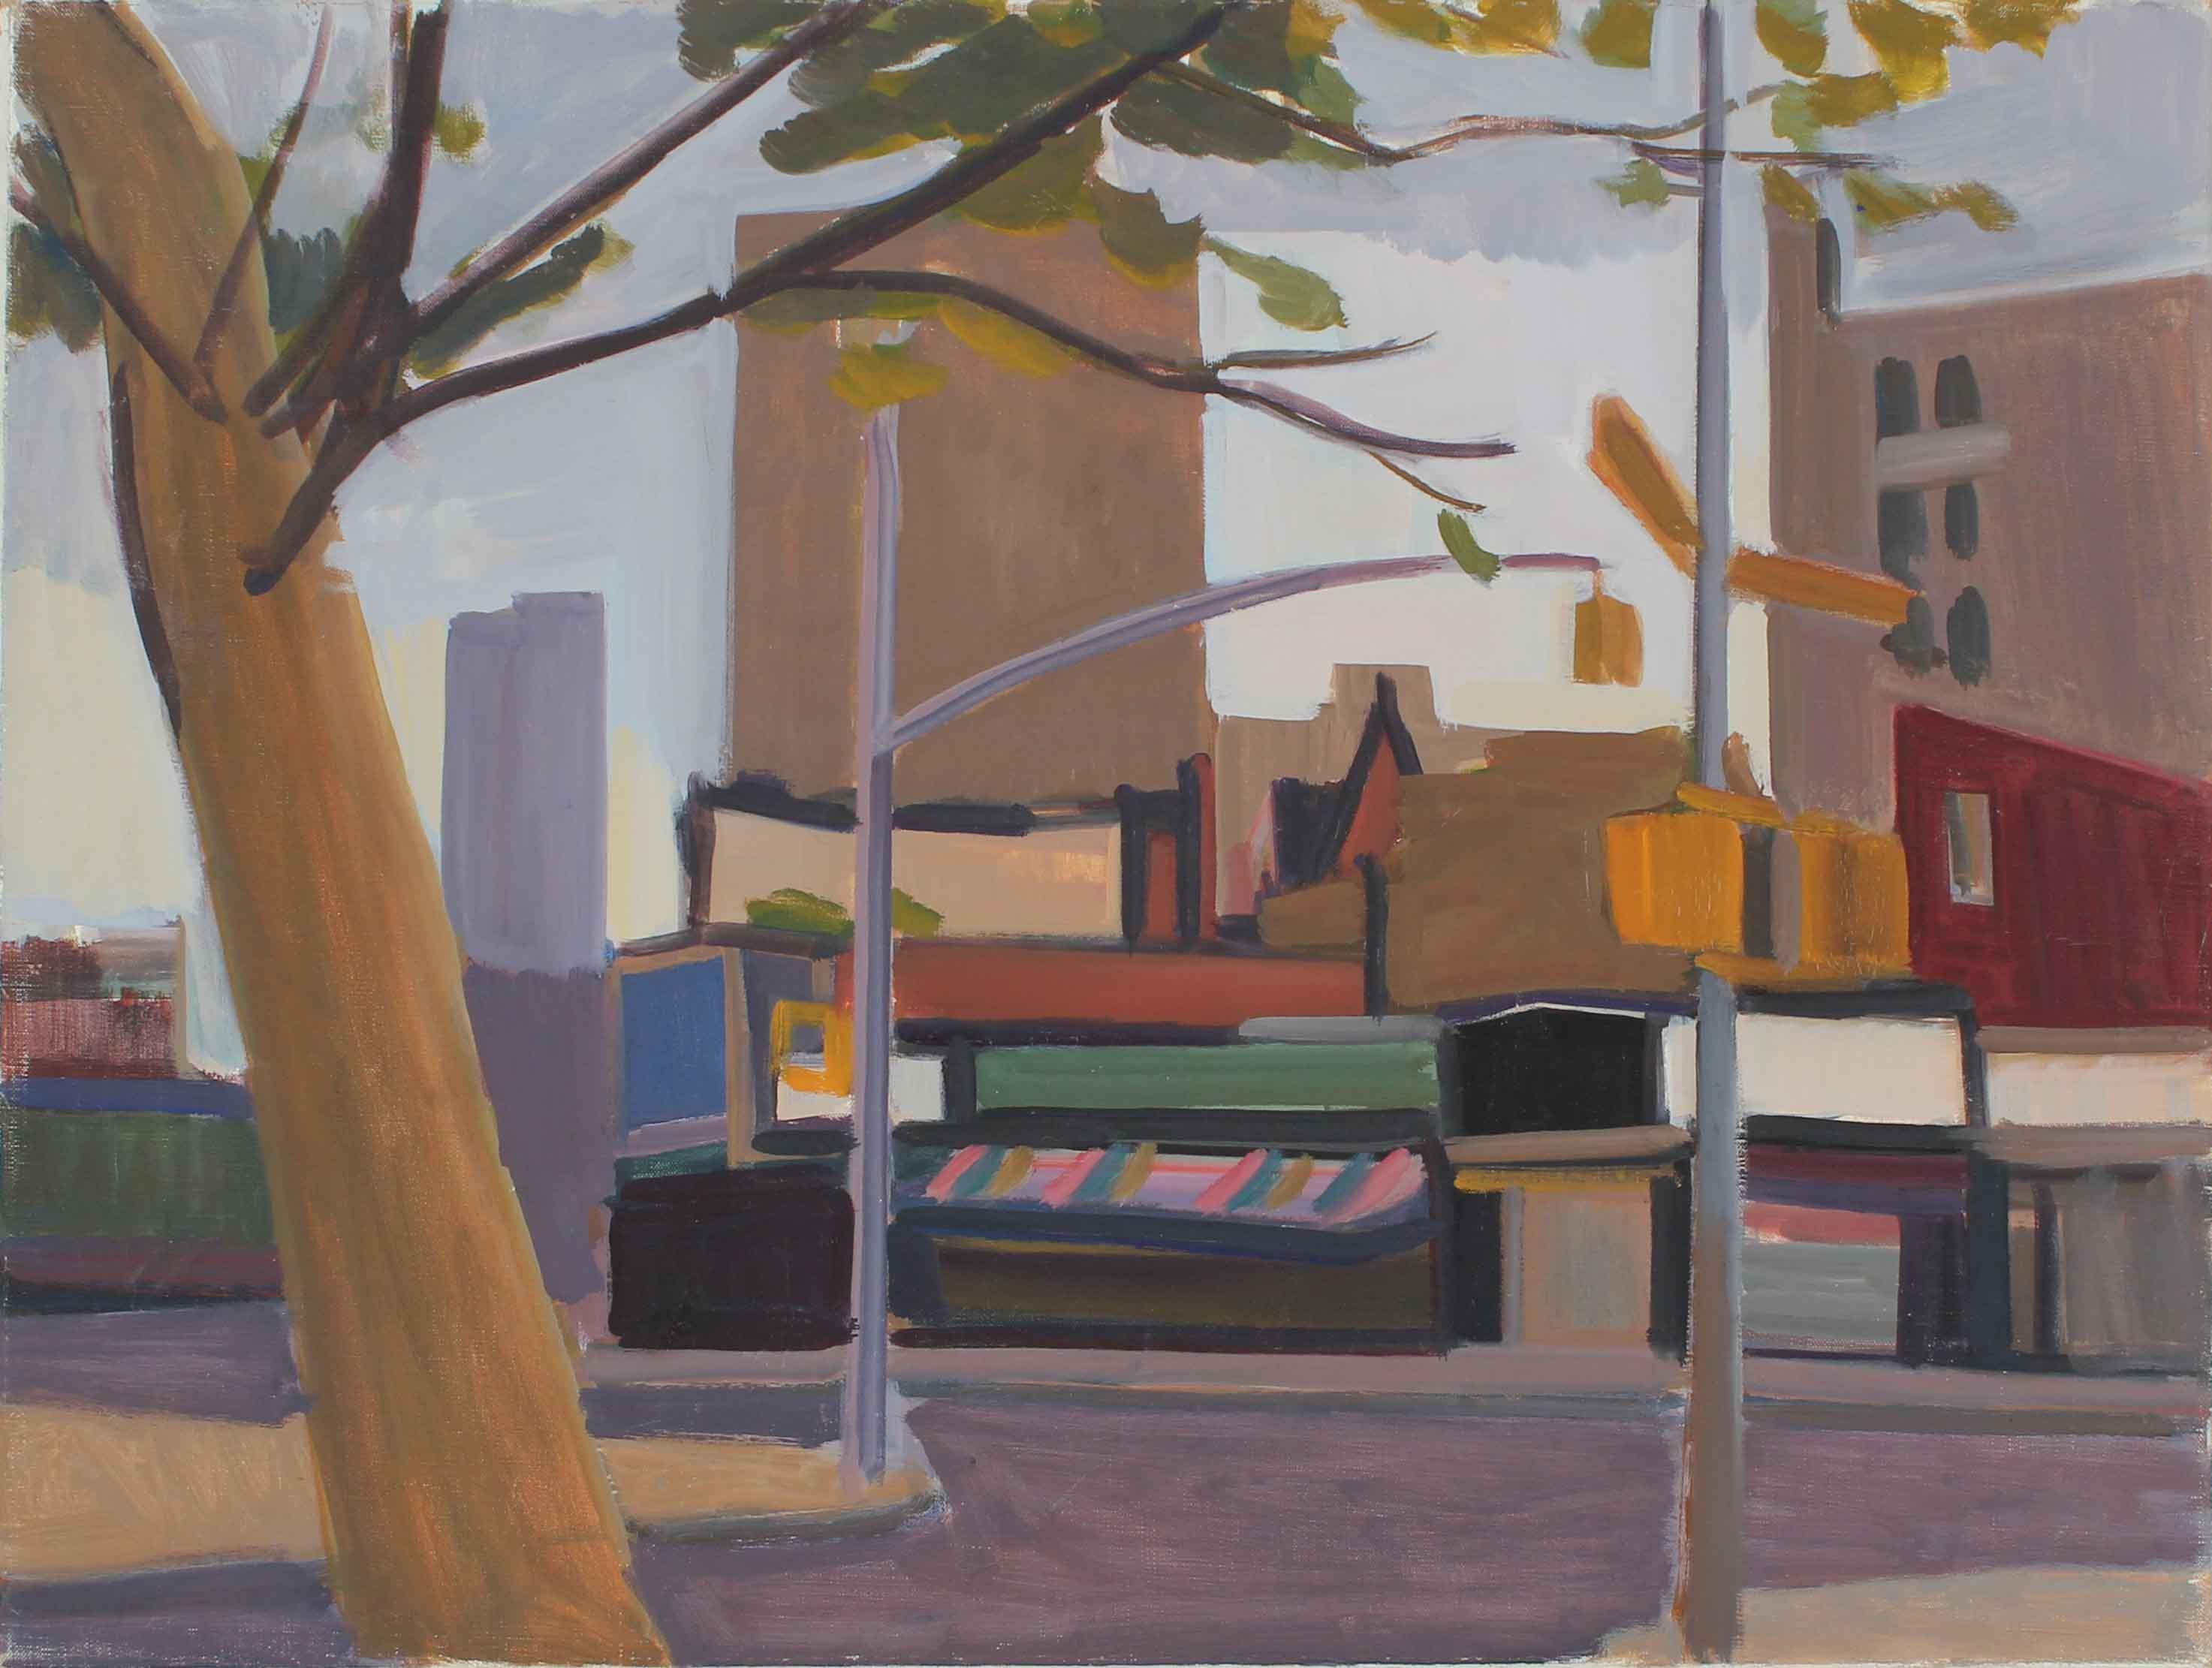 Unknown Landscape Painting - "New York" Urban Cityscape in Oil, 1977